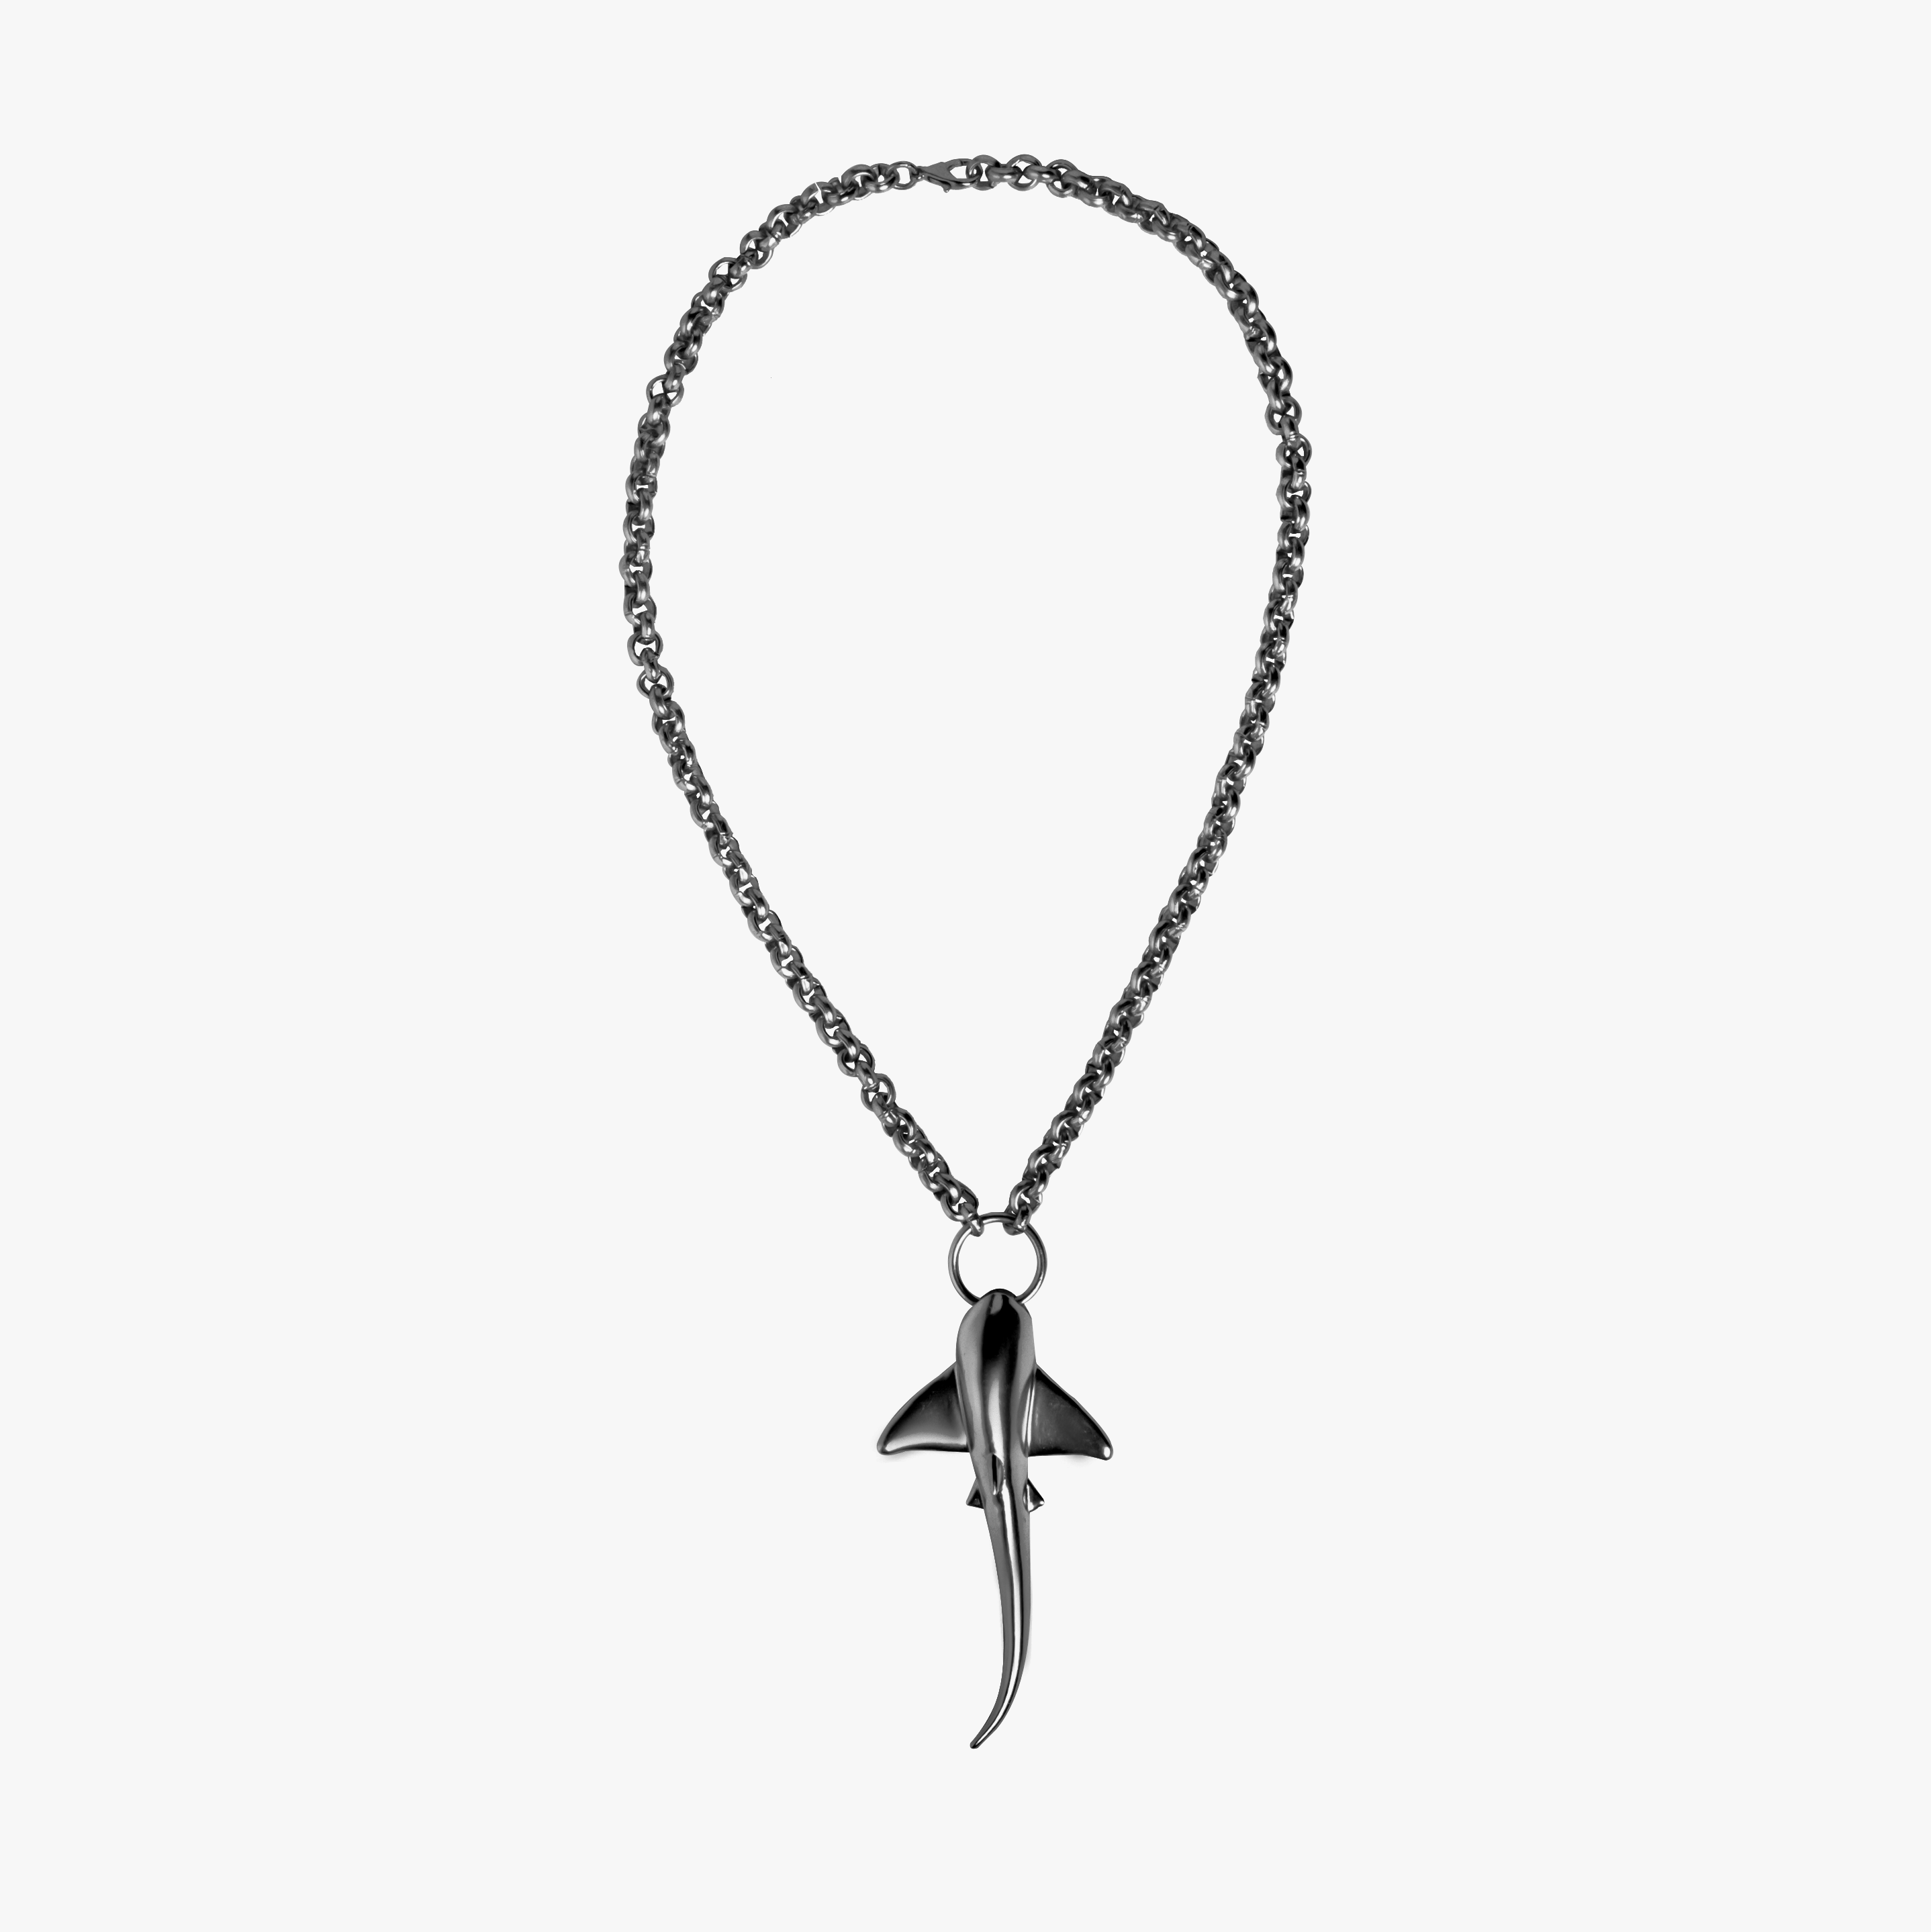 SHARK NECKLACE CHROME TONE , a product by Equiivalence